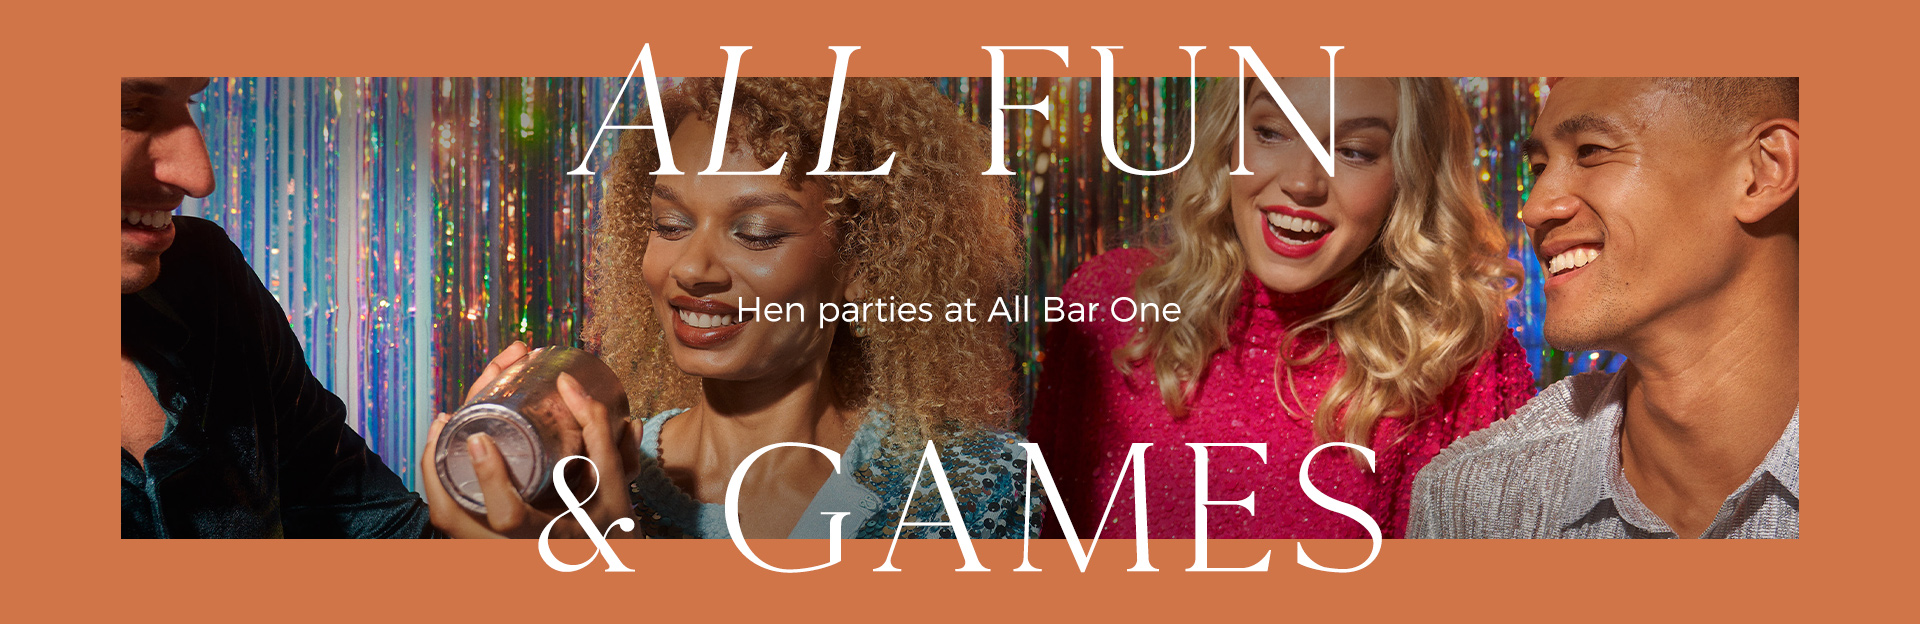 Hen parties at All Bar One Oxford